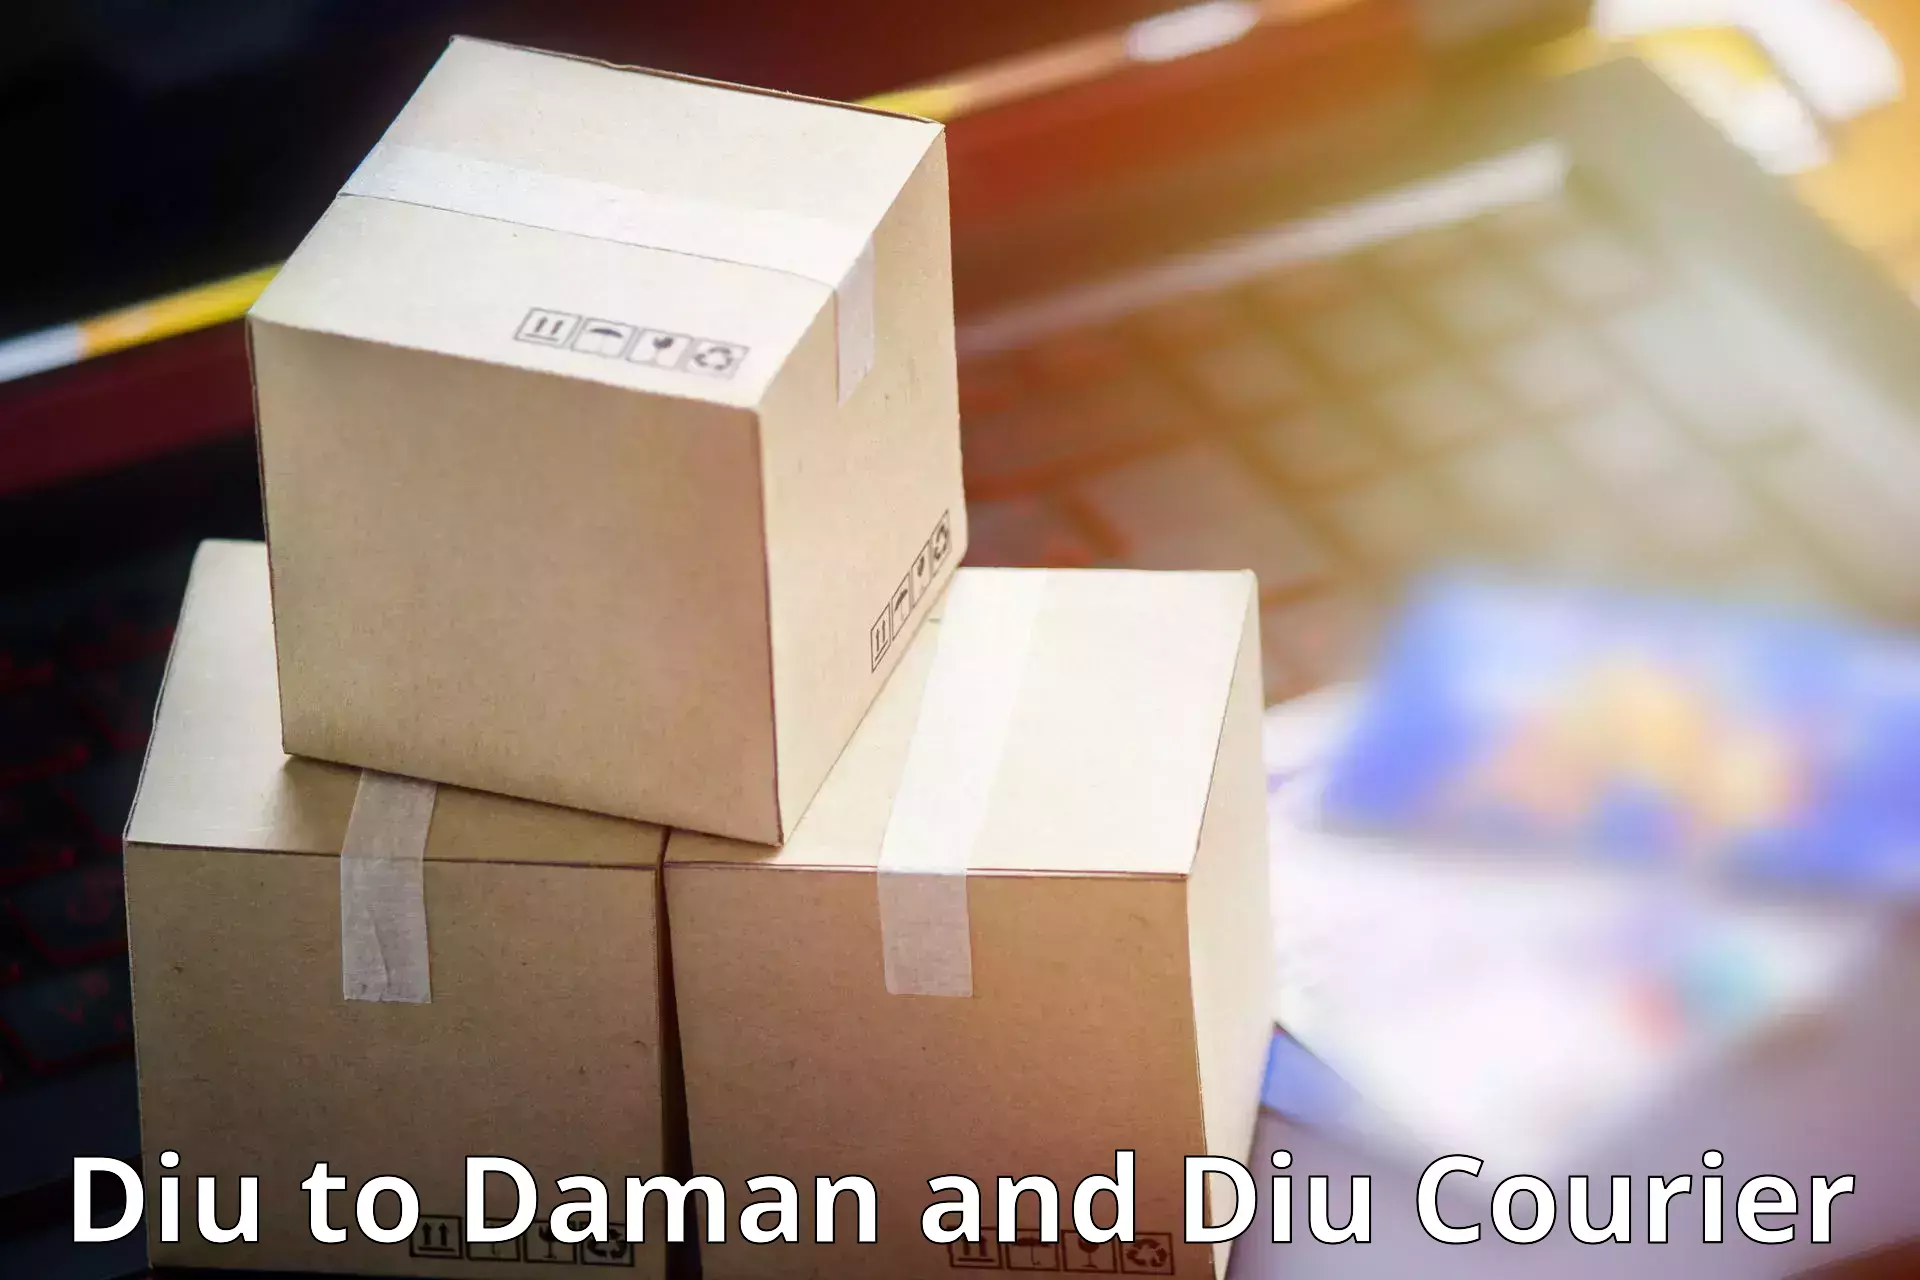 Sustainable shipping practices in Diu to Daman and Diu